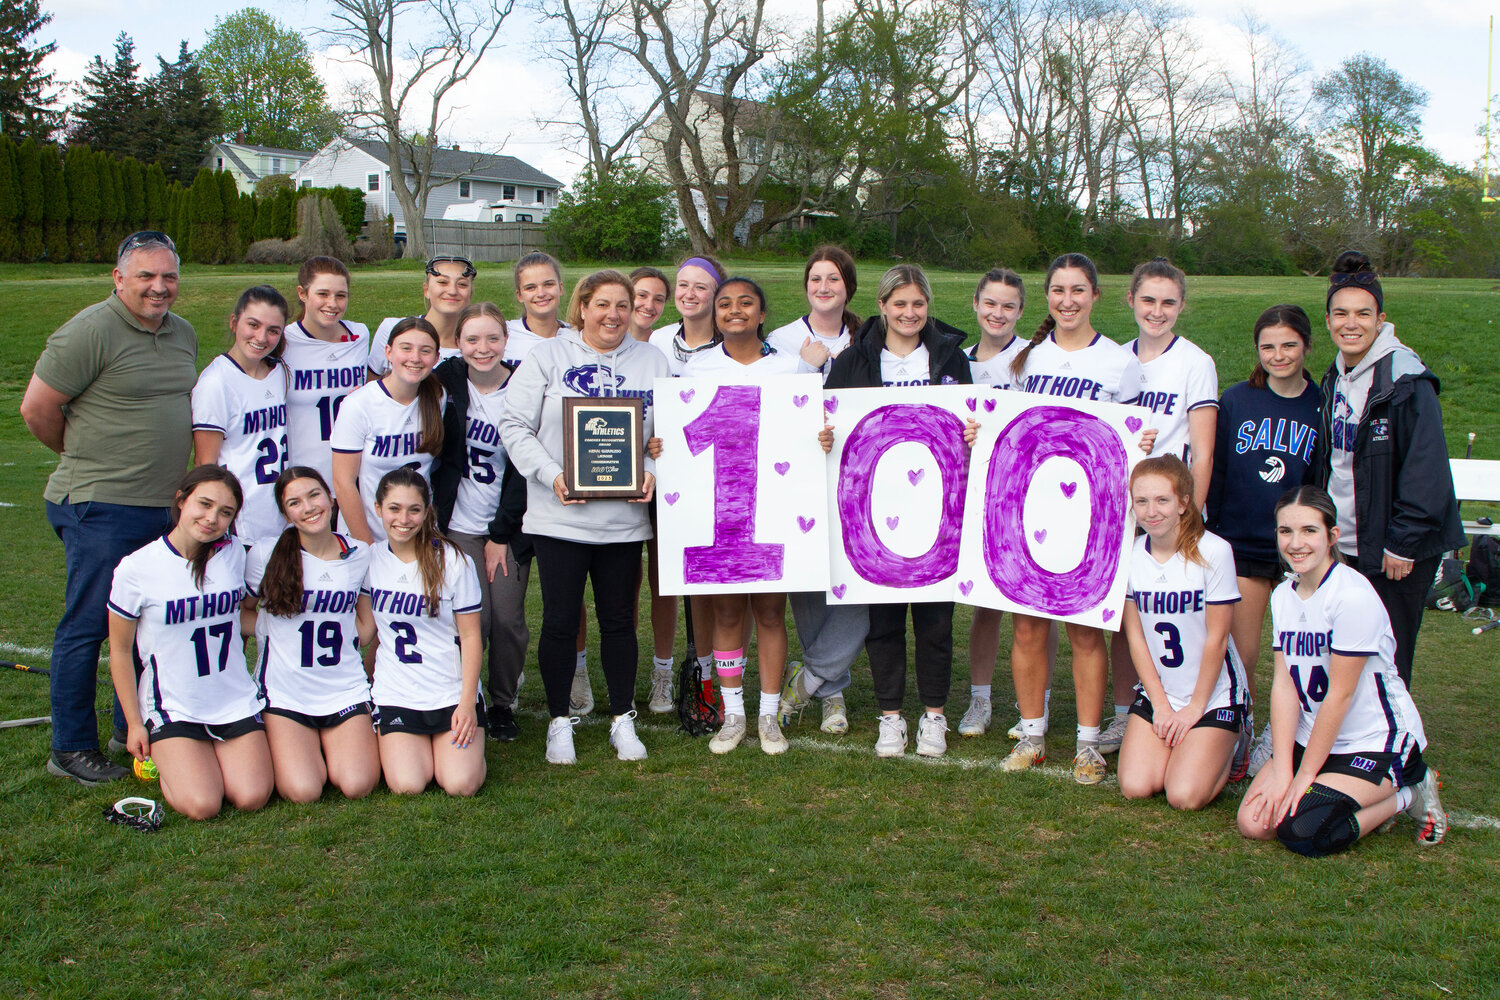 Head coach Kerri Giarrusso (middle) and the girls lacrosse team pose for a photo before the North Kingstown game. Giarrusso won her 100th game when the team beat Toll Gate on Wednesday and was presented a plaque from athletic director Christy Belisle before the North Kingstown game.